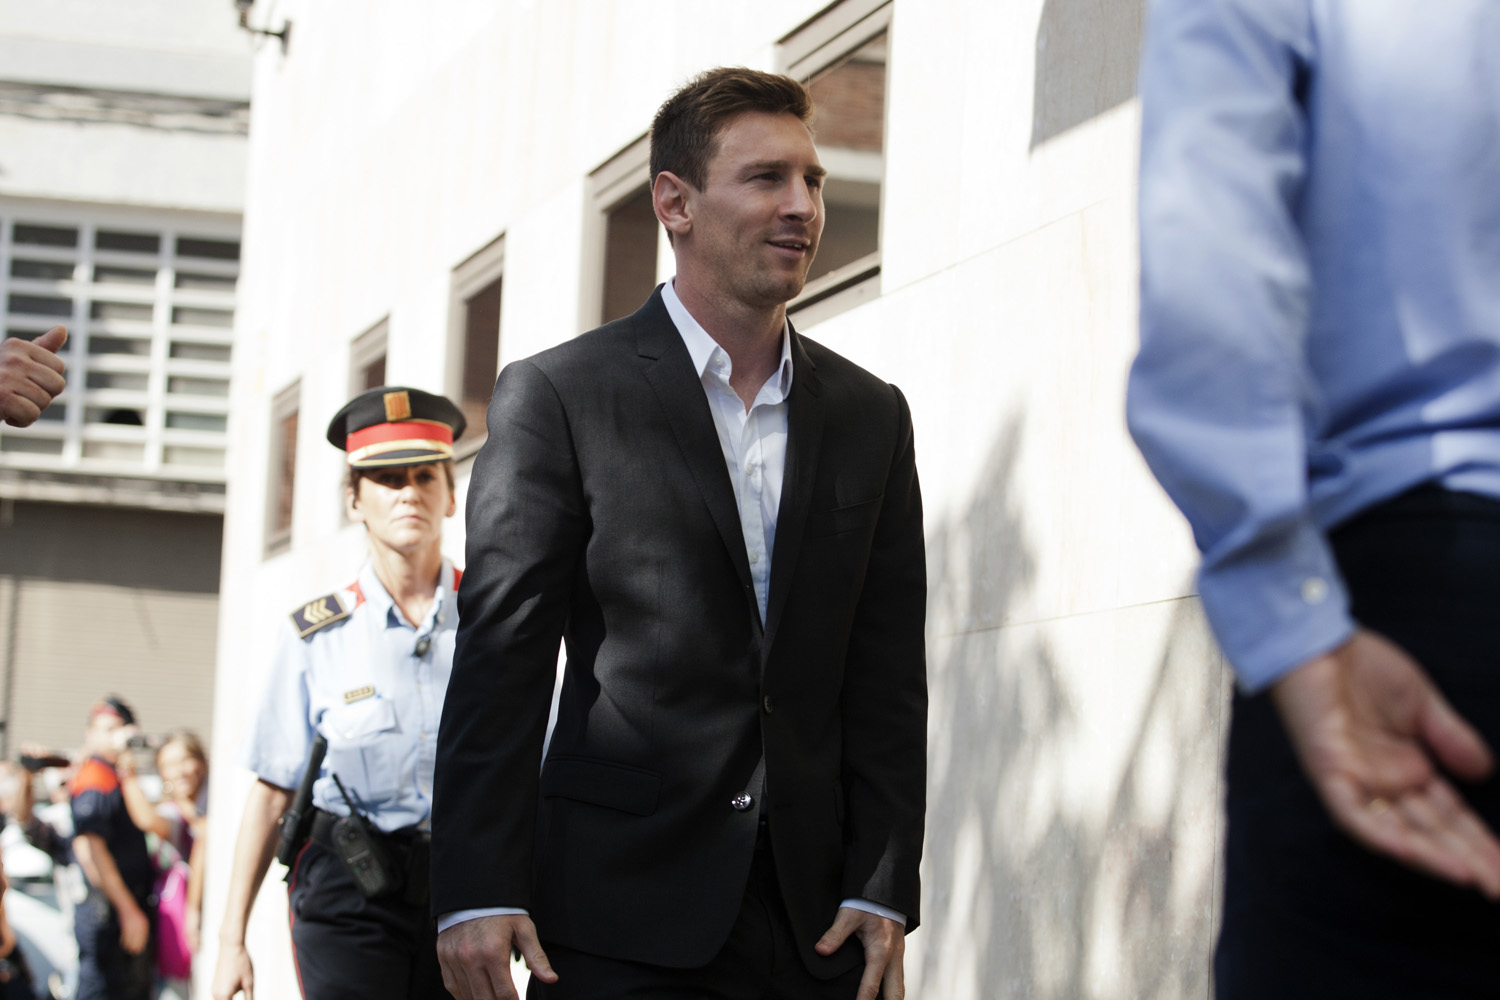 Sept. 27, 2013. Barcelona F.C. soccer player Lionel Messi, center, arrives at a court to answer questions in a tax fraud case near Barcelona.